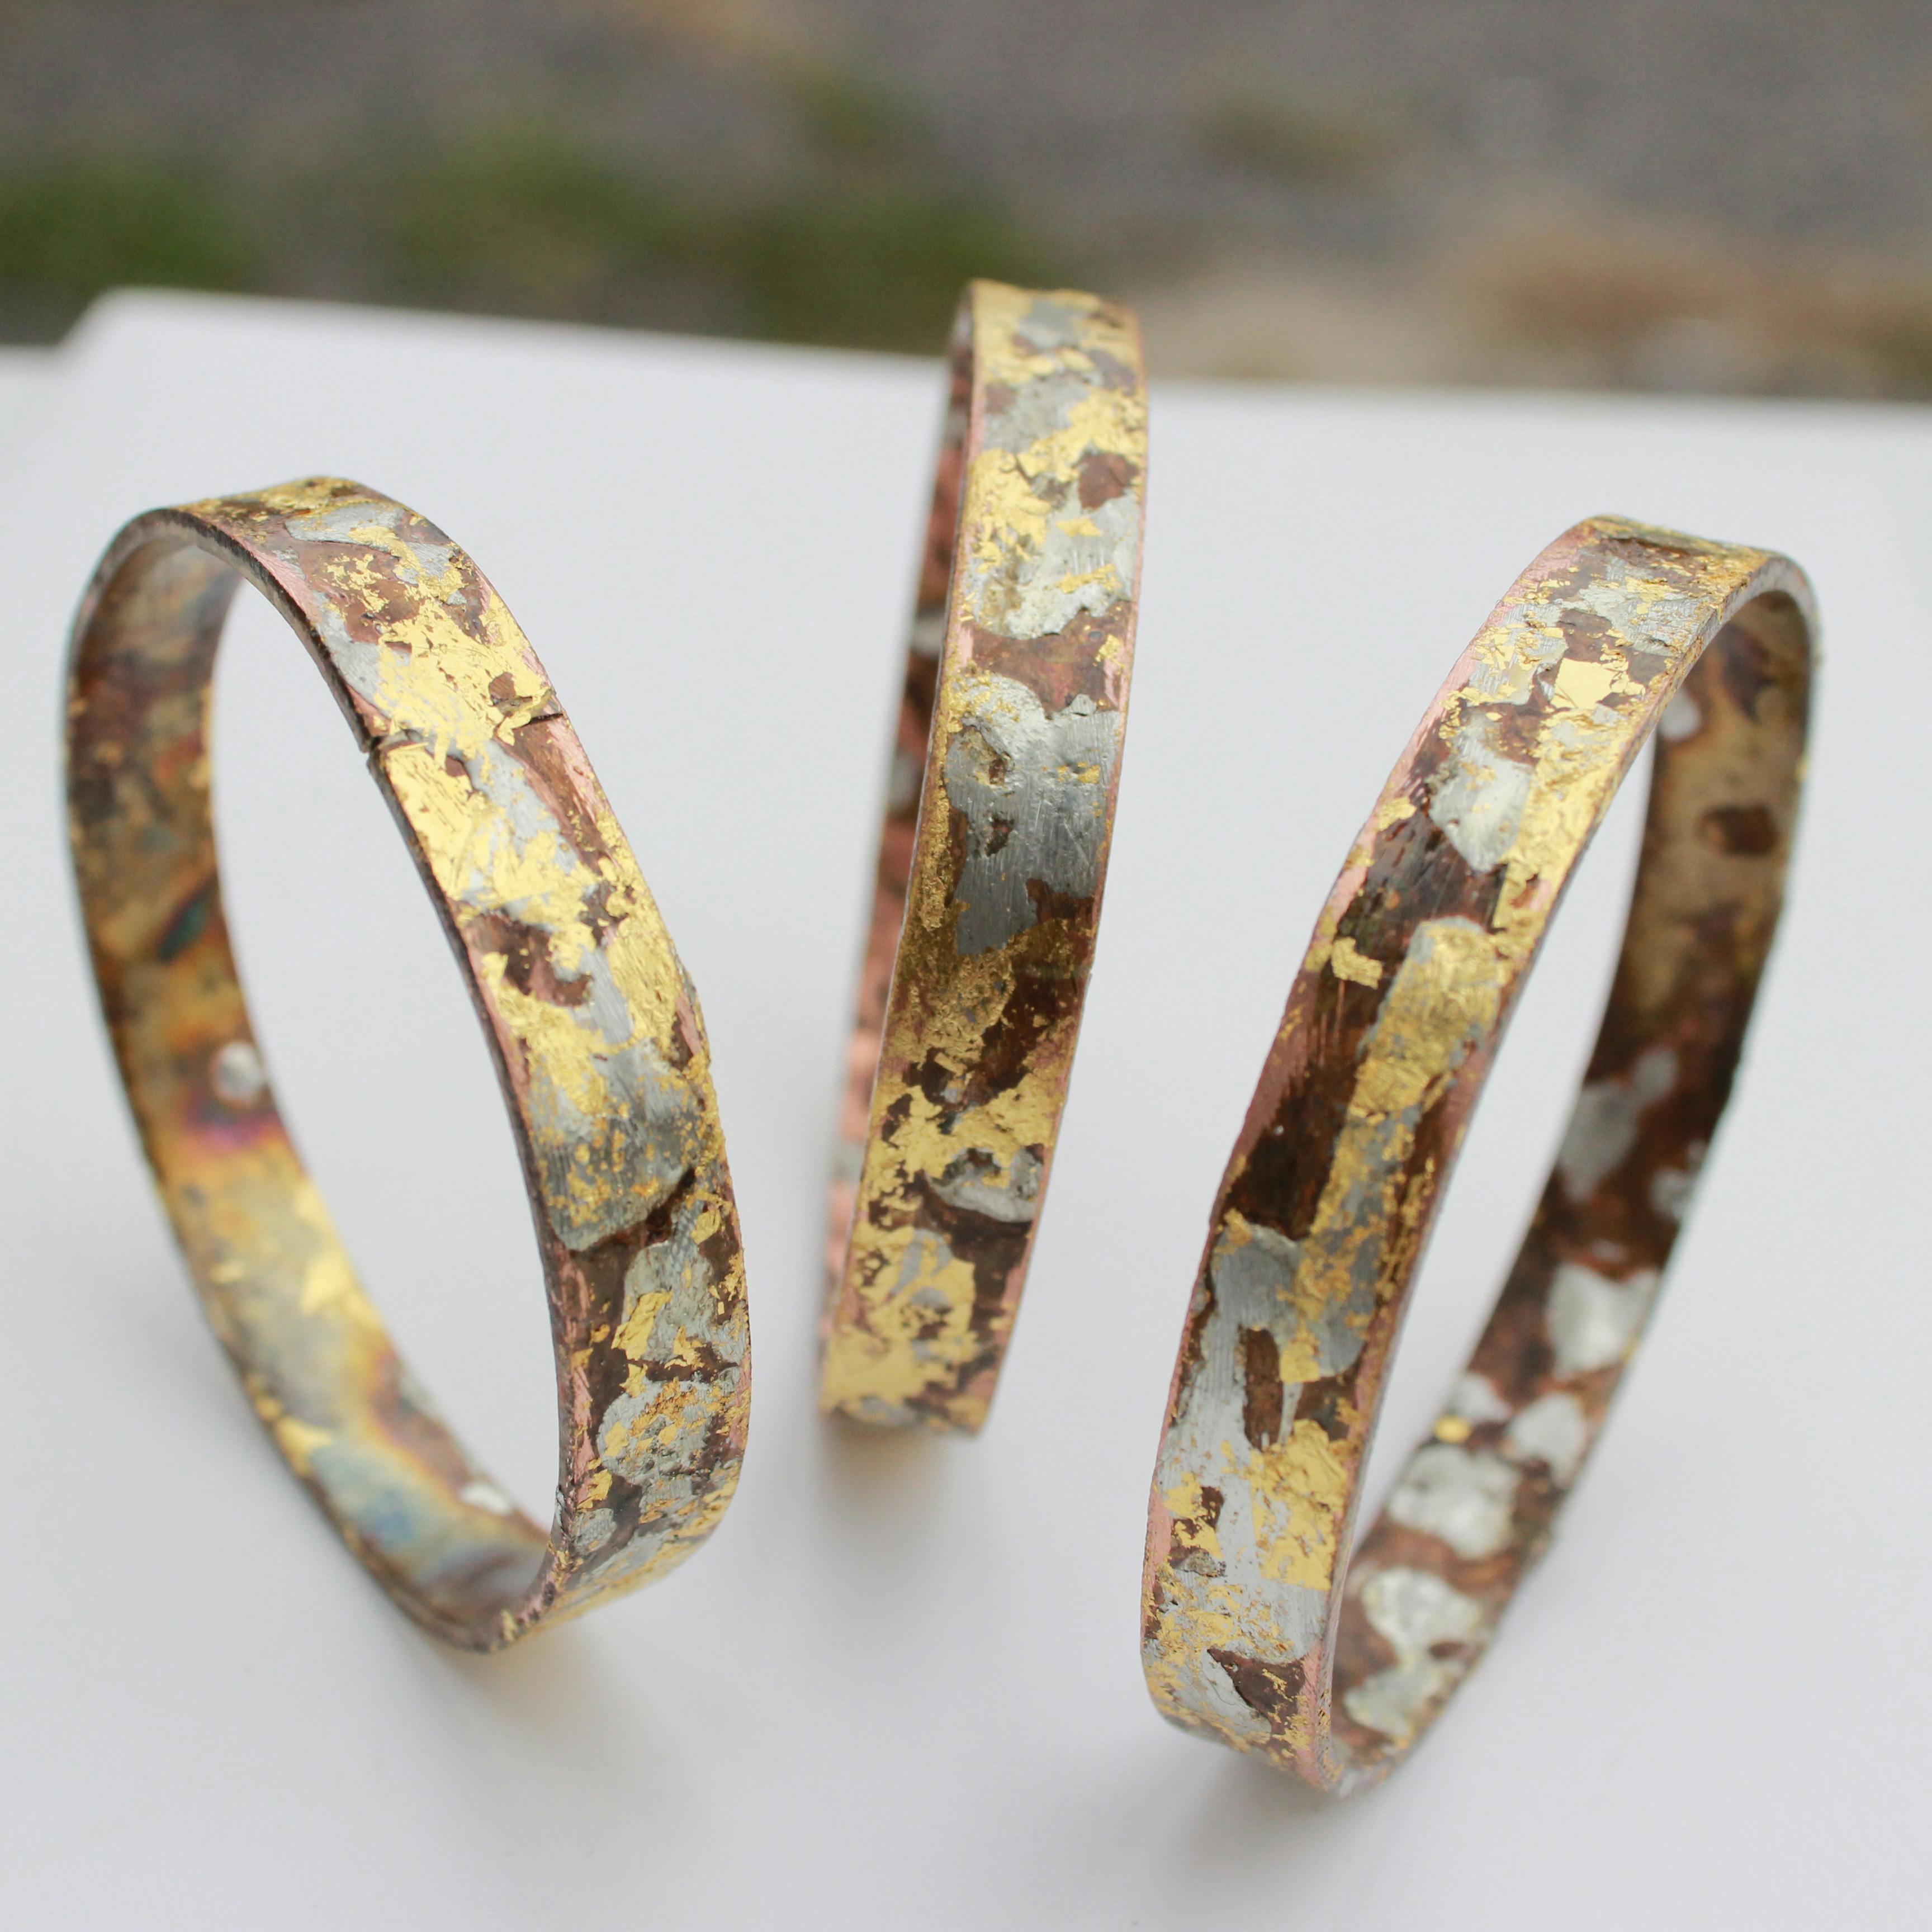 close-up photo of three textured gold and copper bracelets balancing on their sides